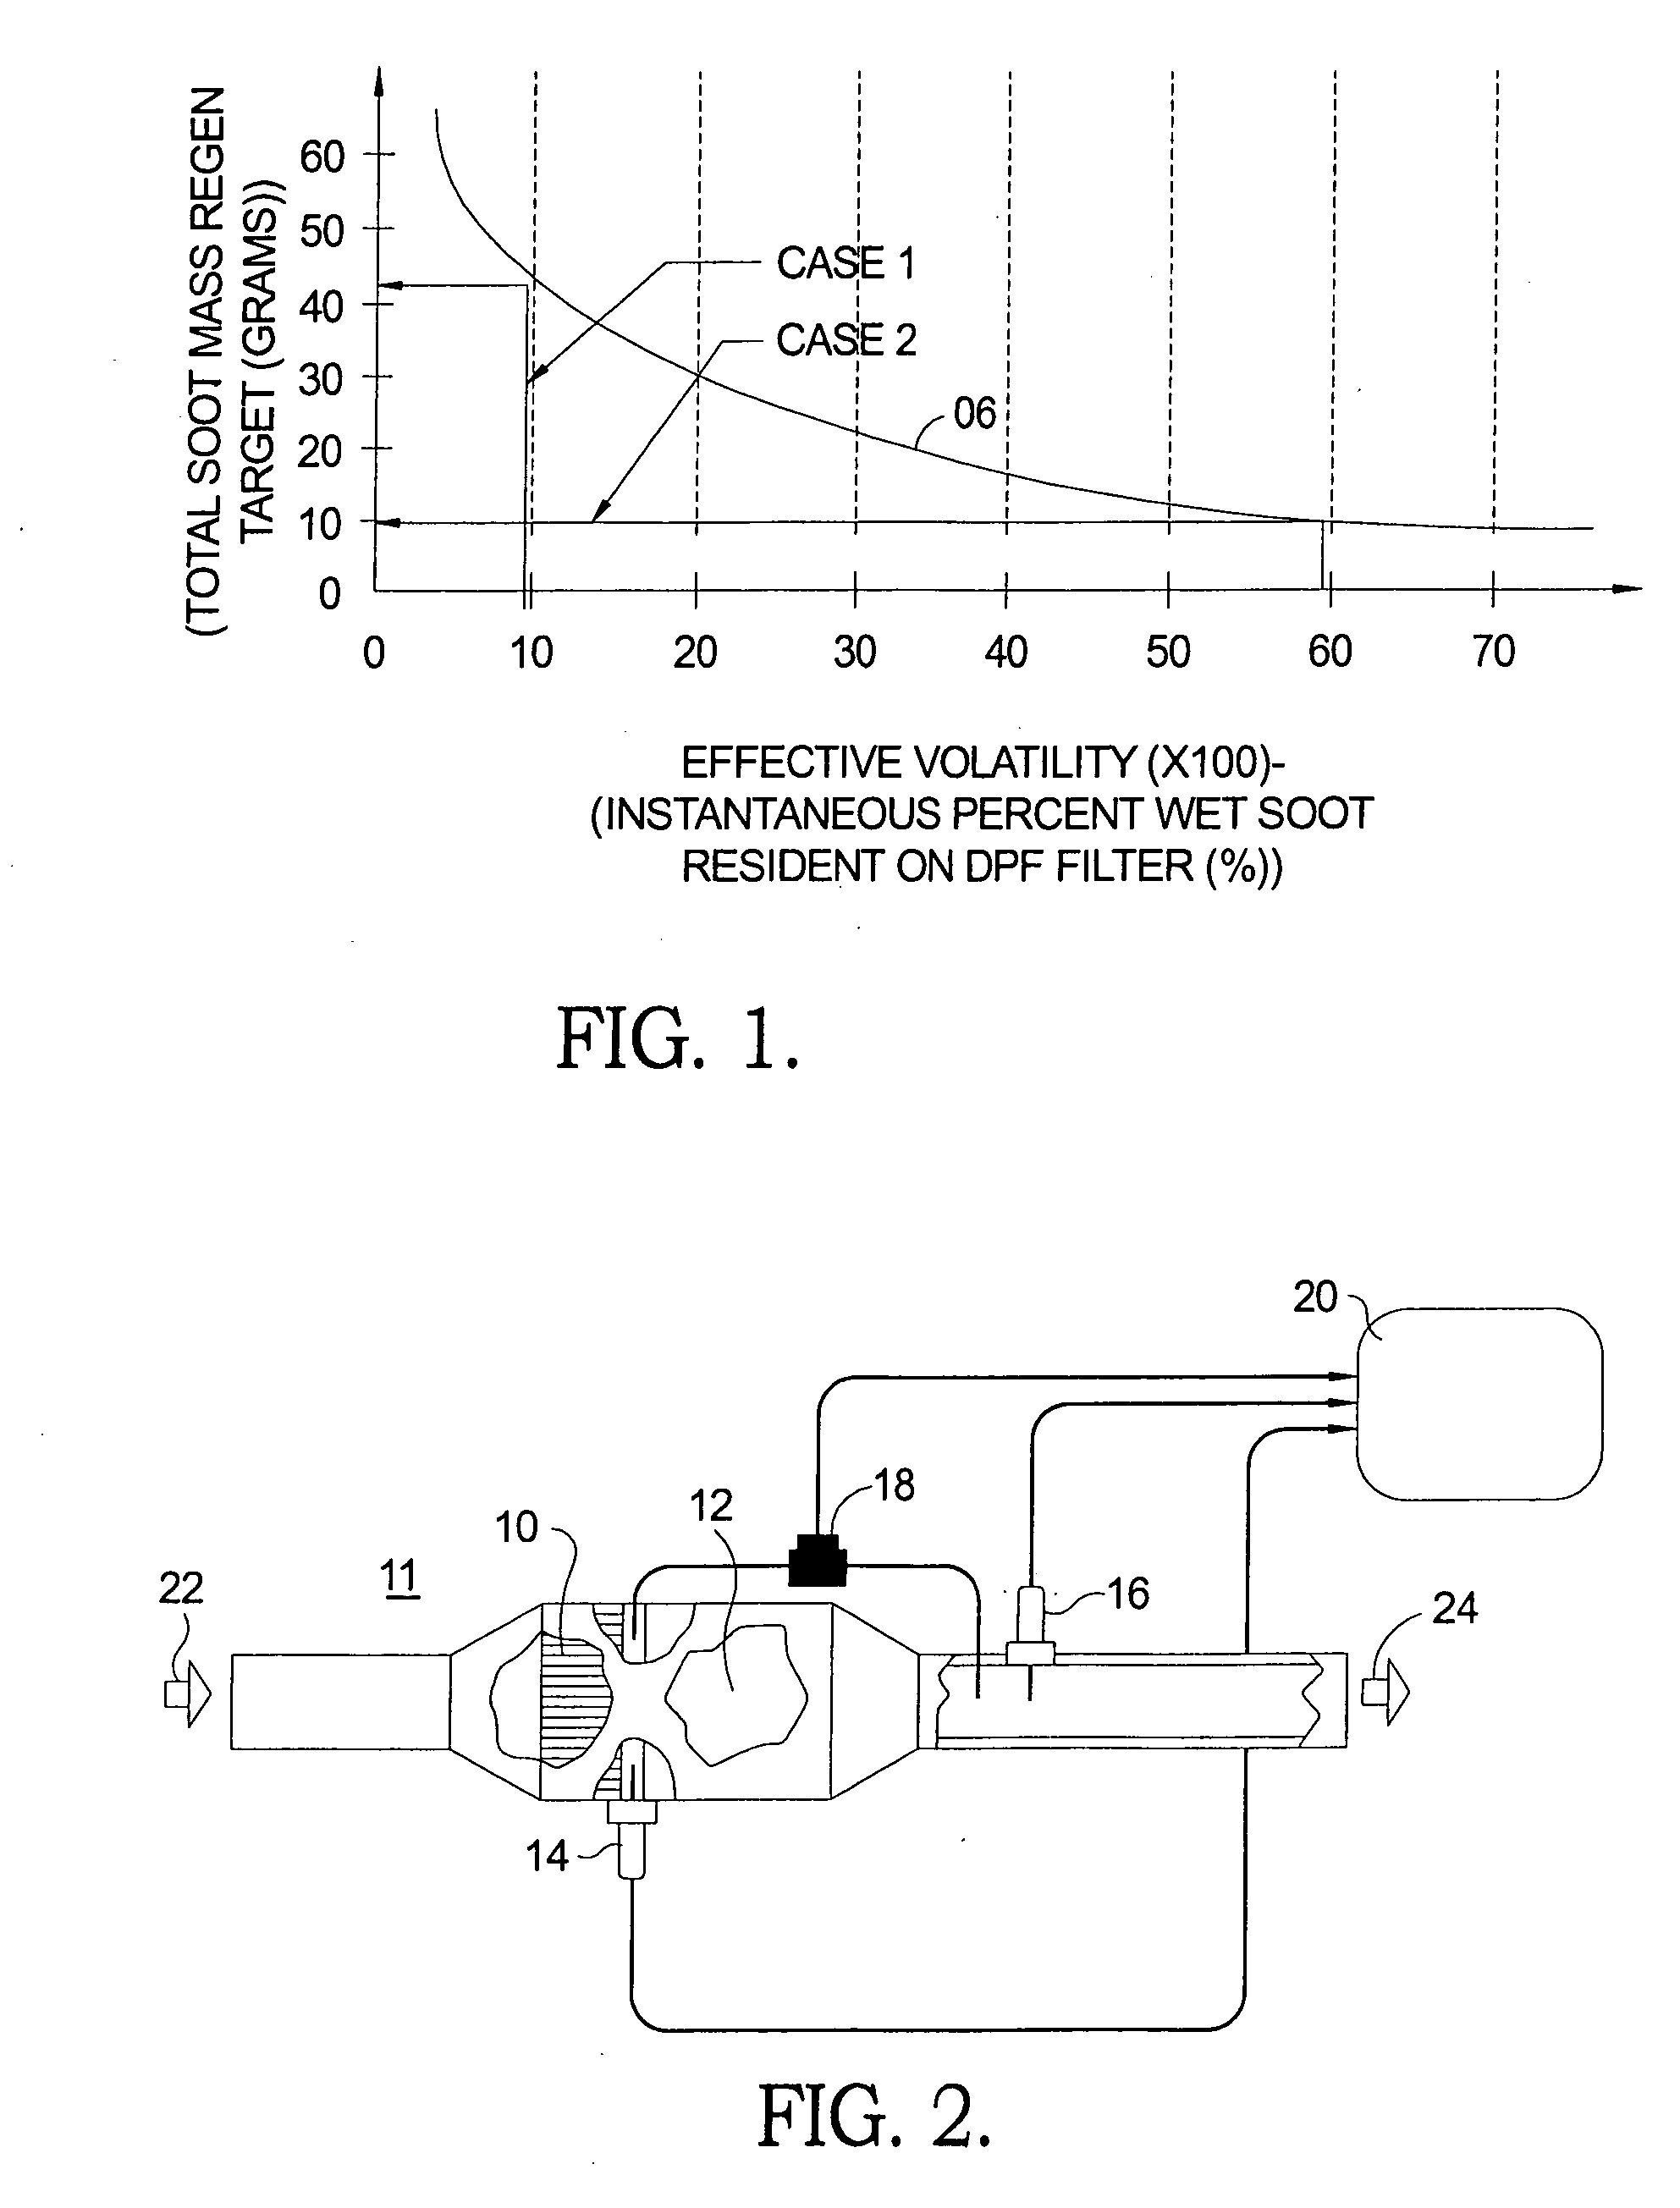 Method for controlling catalyst and filter temperatures in regeneration of a catalytic diesel particulate filter